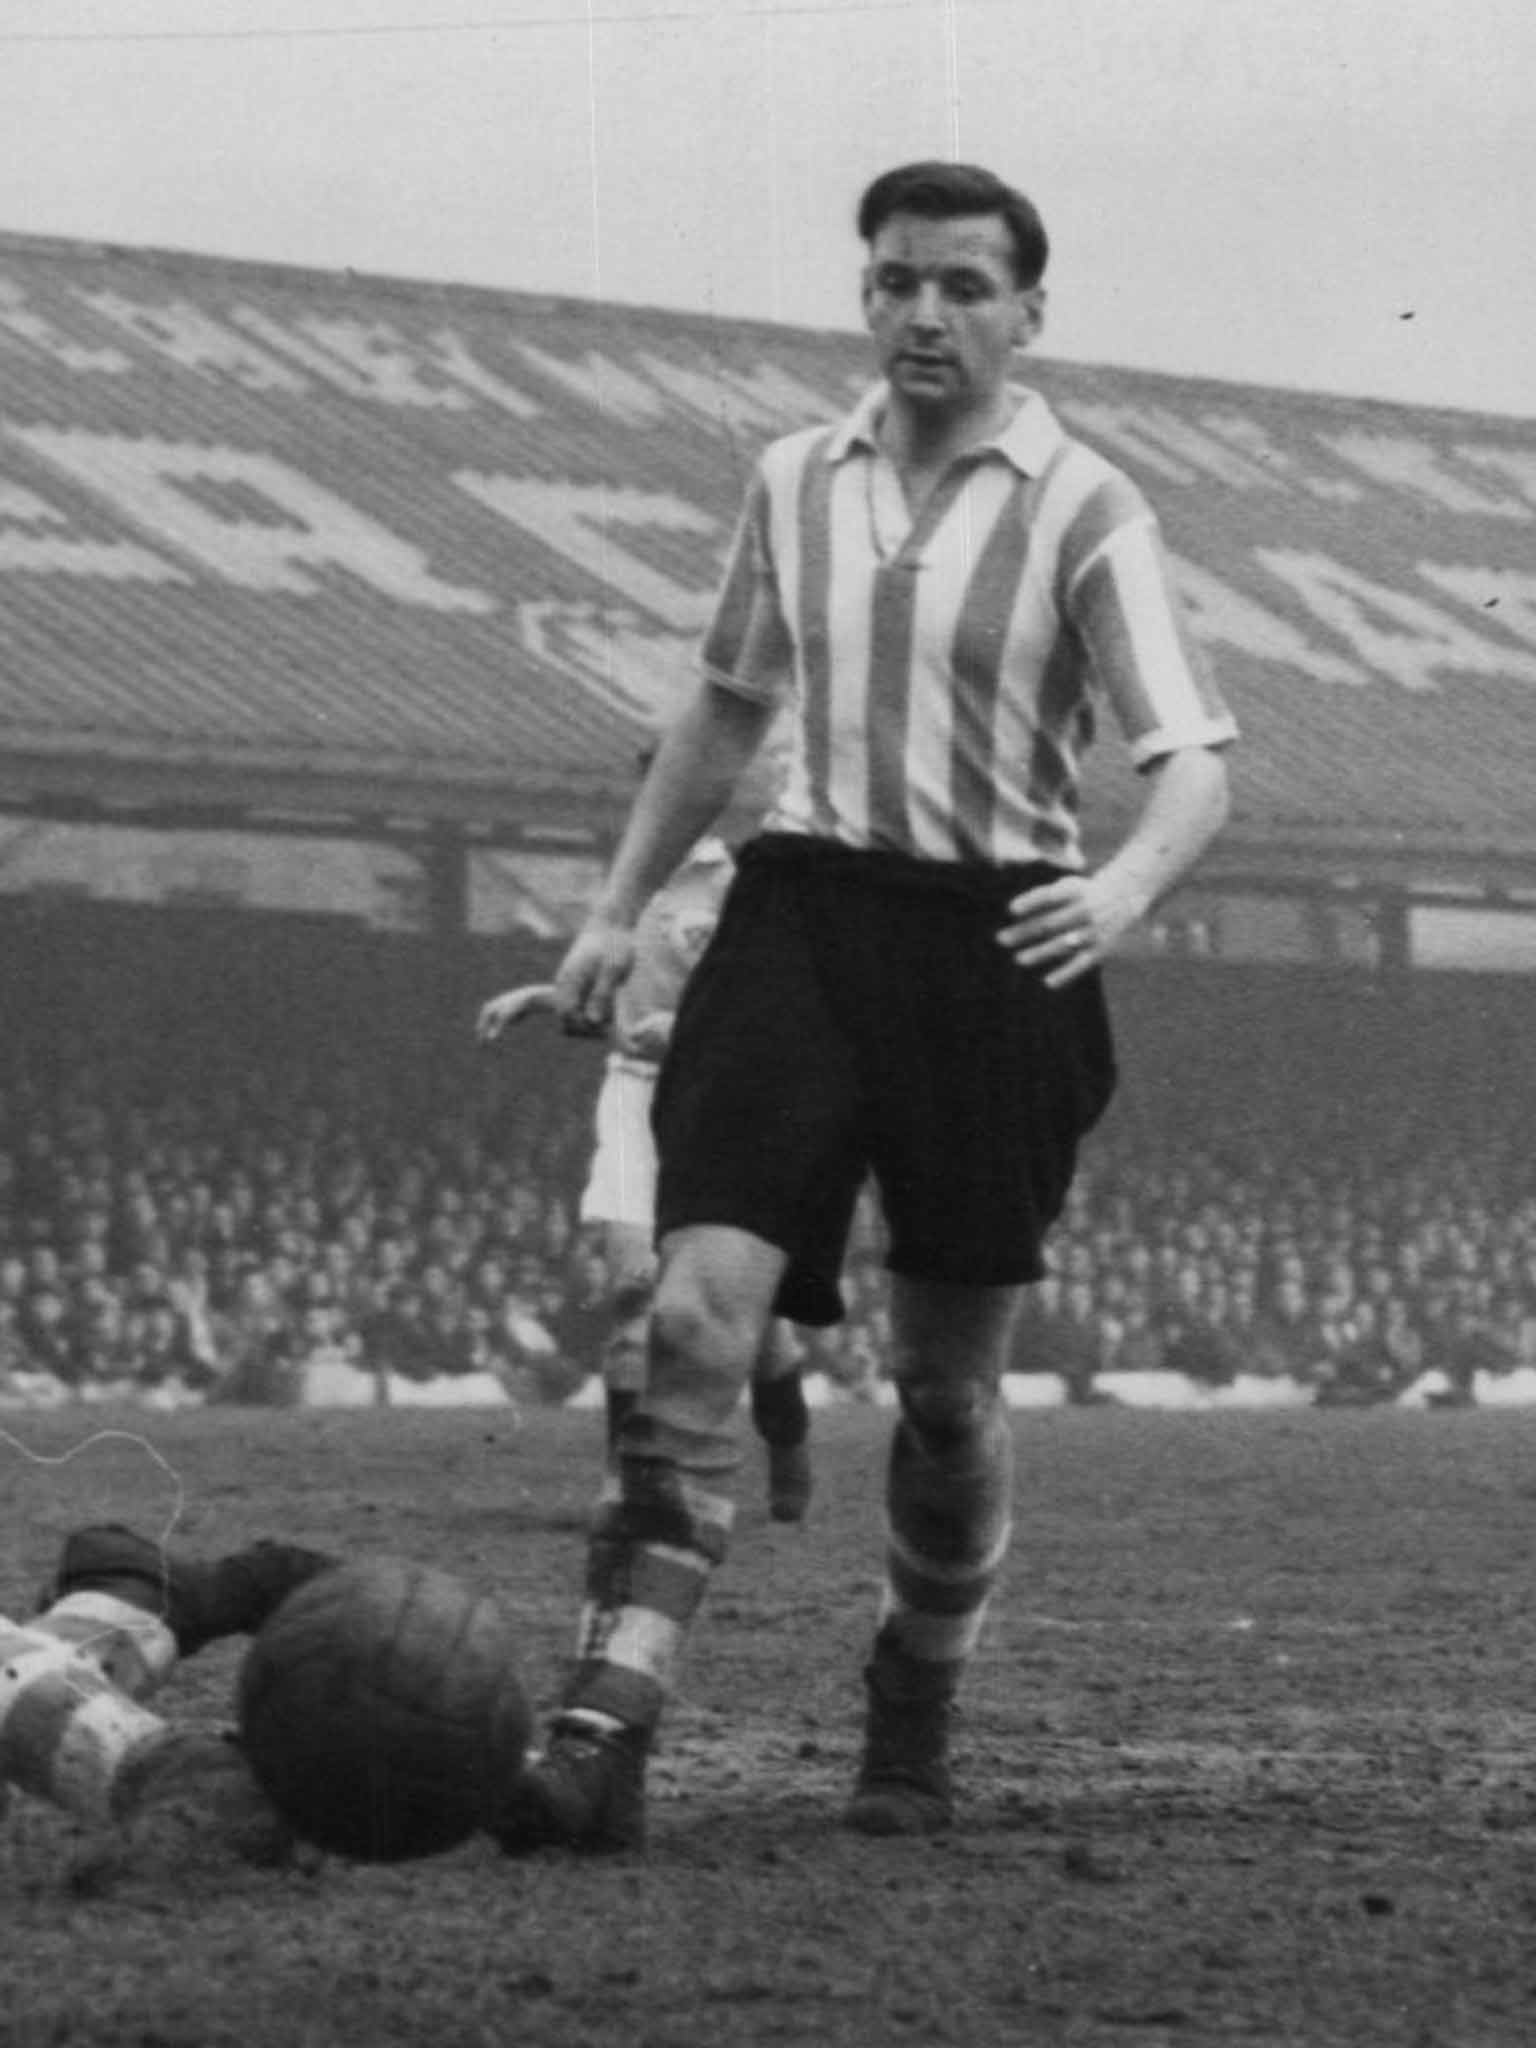 Quietly classy: Ellerington in action for Southampton against Blackpool in 1953